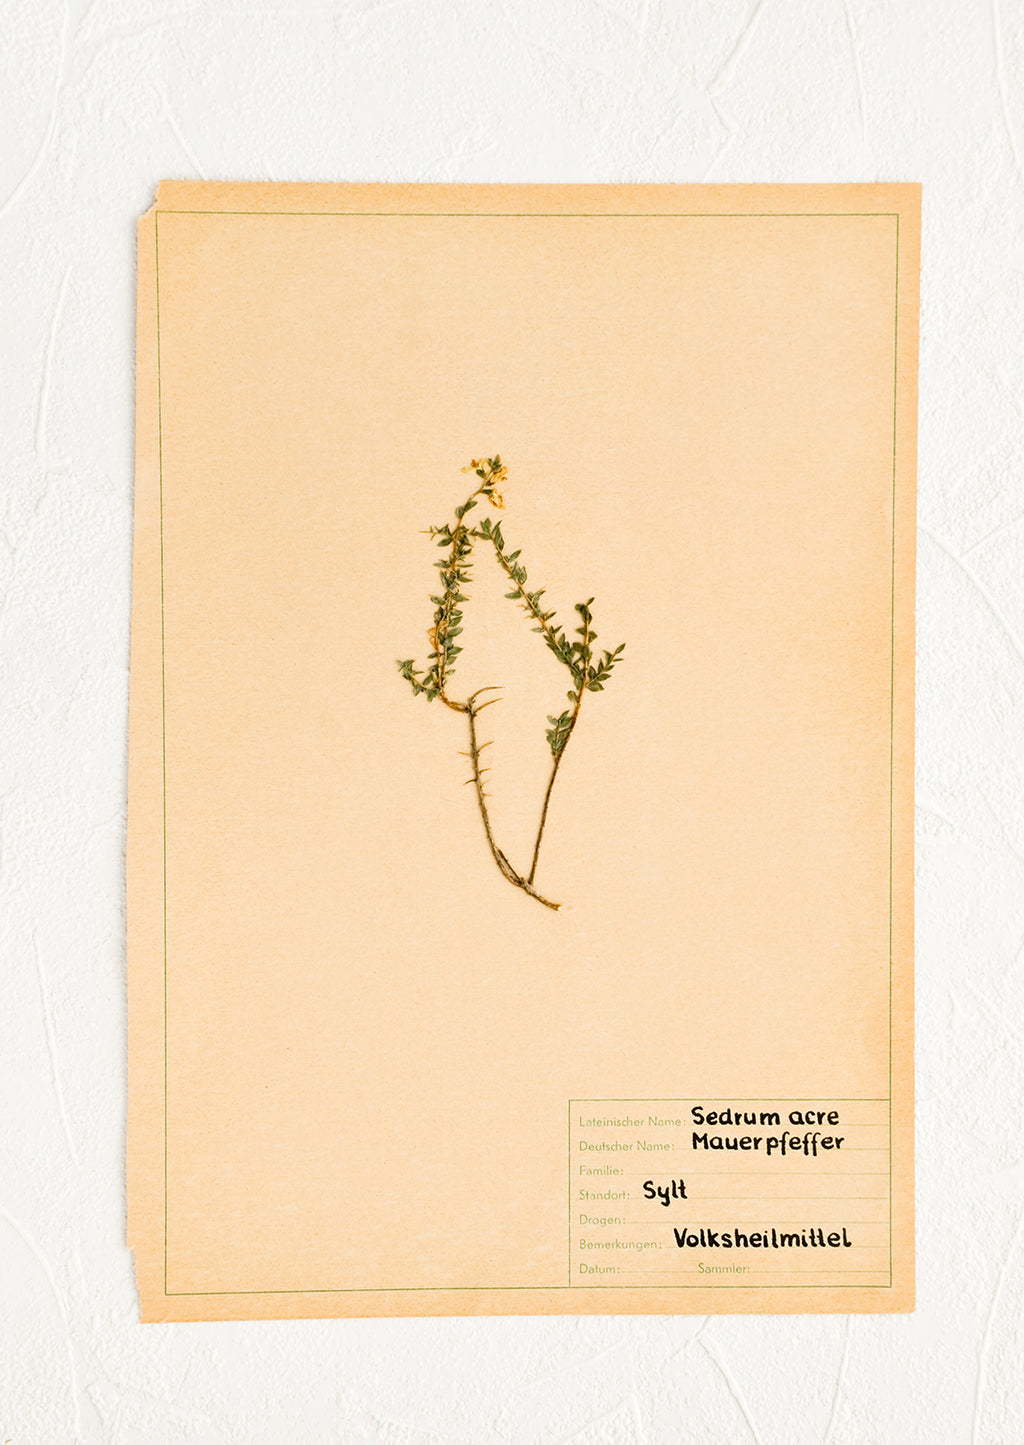 1: Dried floral specimen taped and preserved on paper, intended for framing